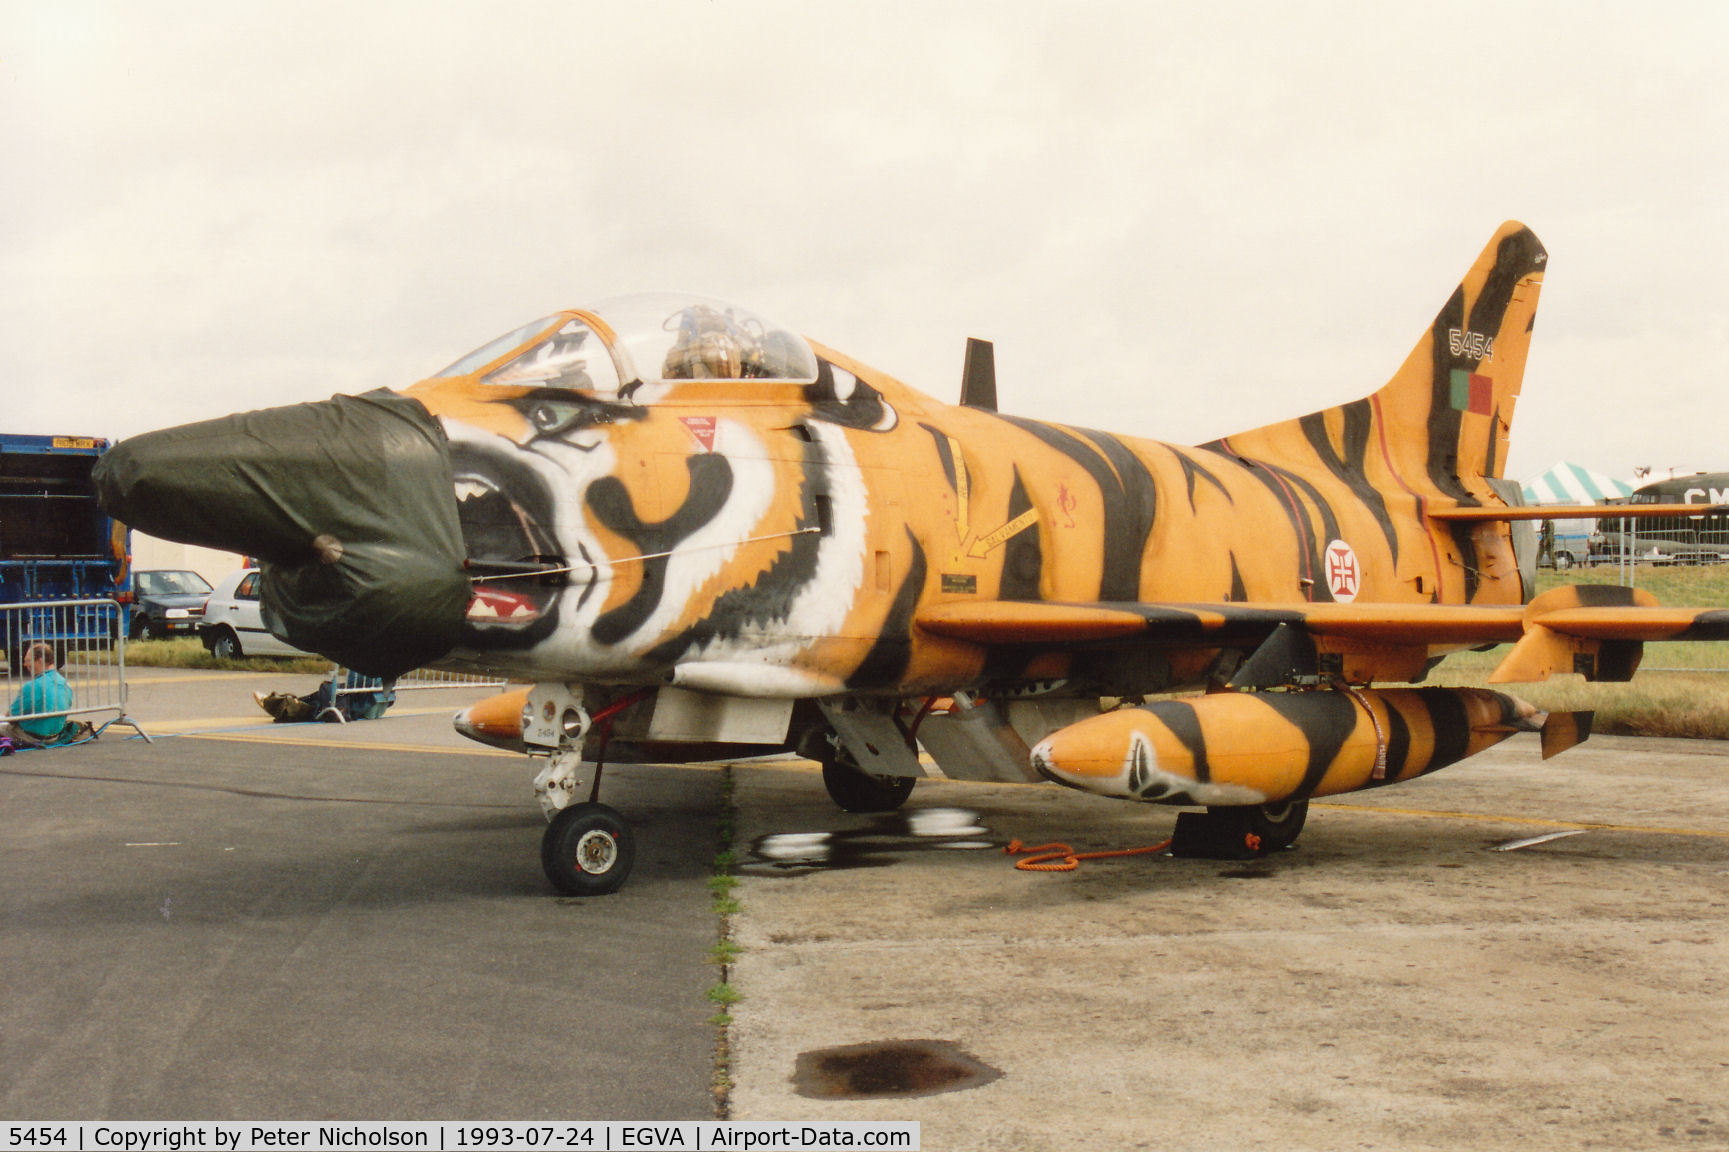 5454, Fiat G-91R/3 C/N D532, G-91R/3 of 301 Esquadron Portuguese Air Force on display at the 1993 Intnl Air Tattoo at RAF Fairford.